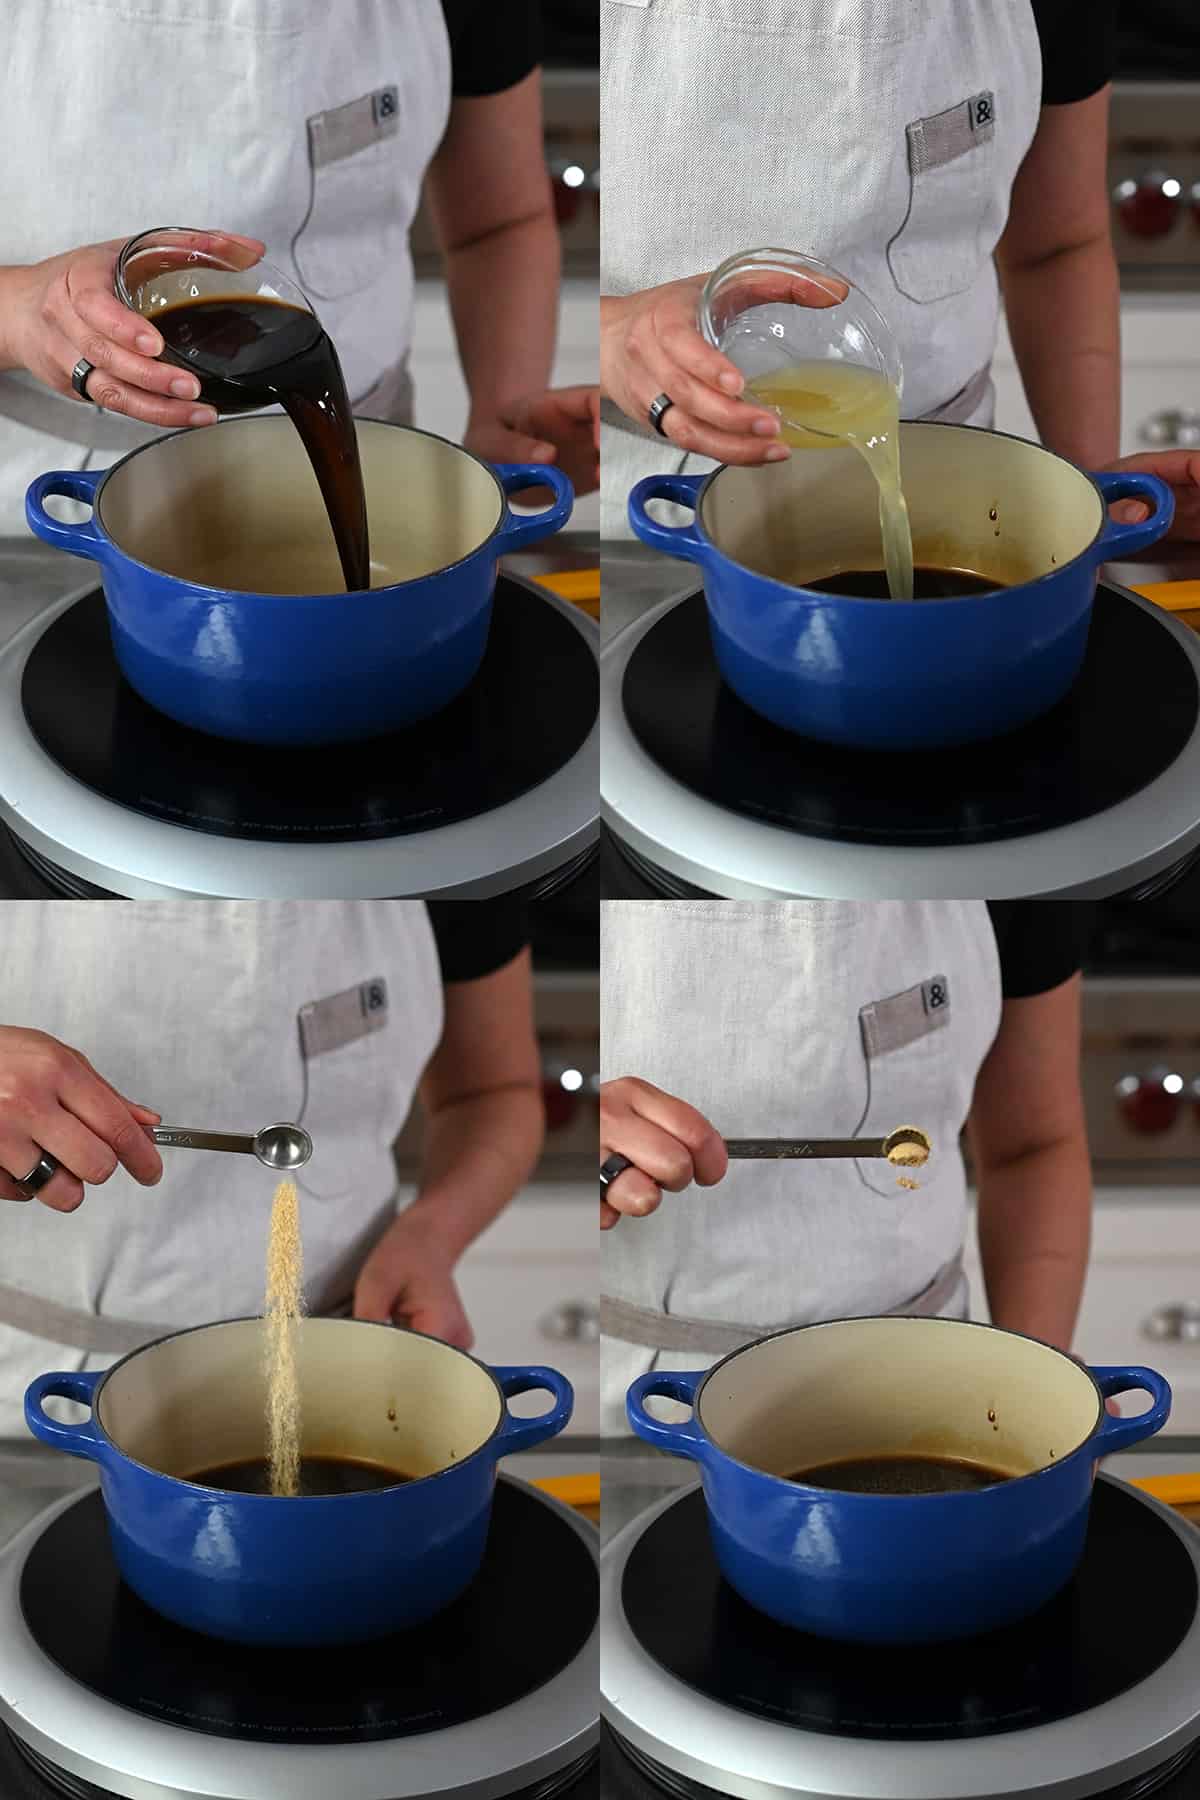 Four sequential photos that show someone adding the ingredients to make a paleo and Whole30 teriyaki sauce into a blue saucepan.